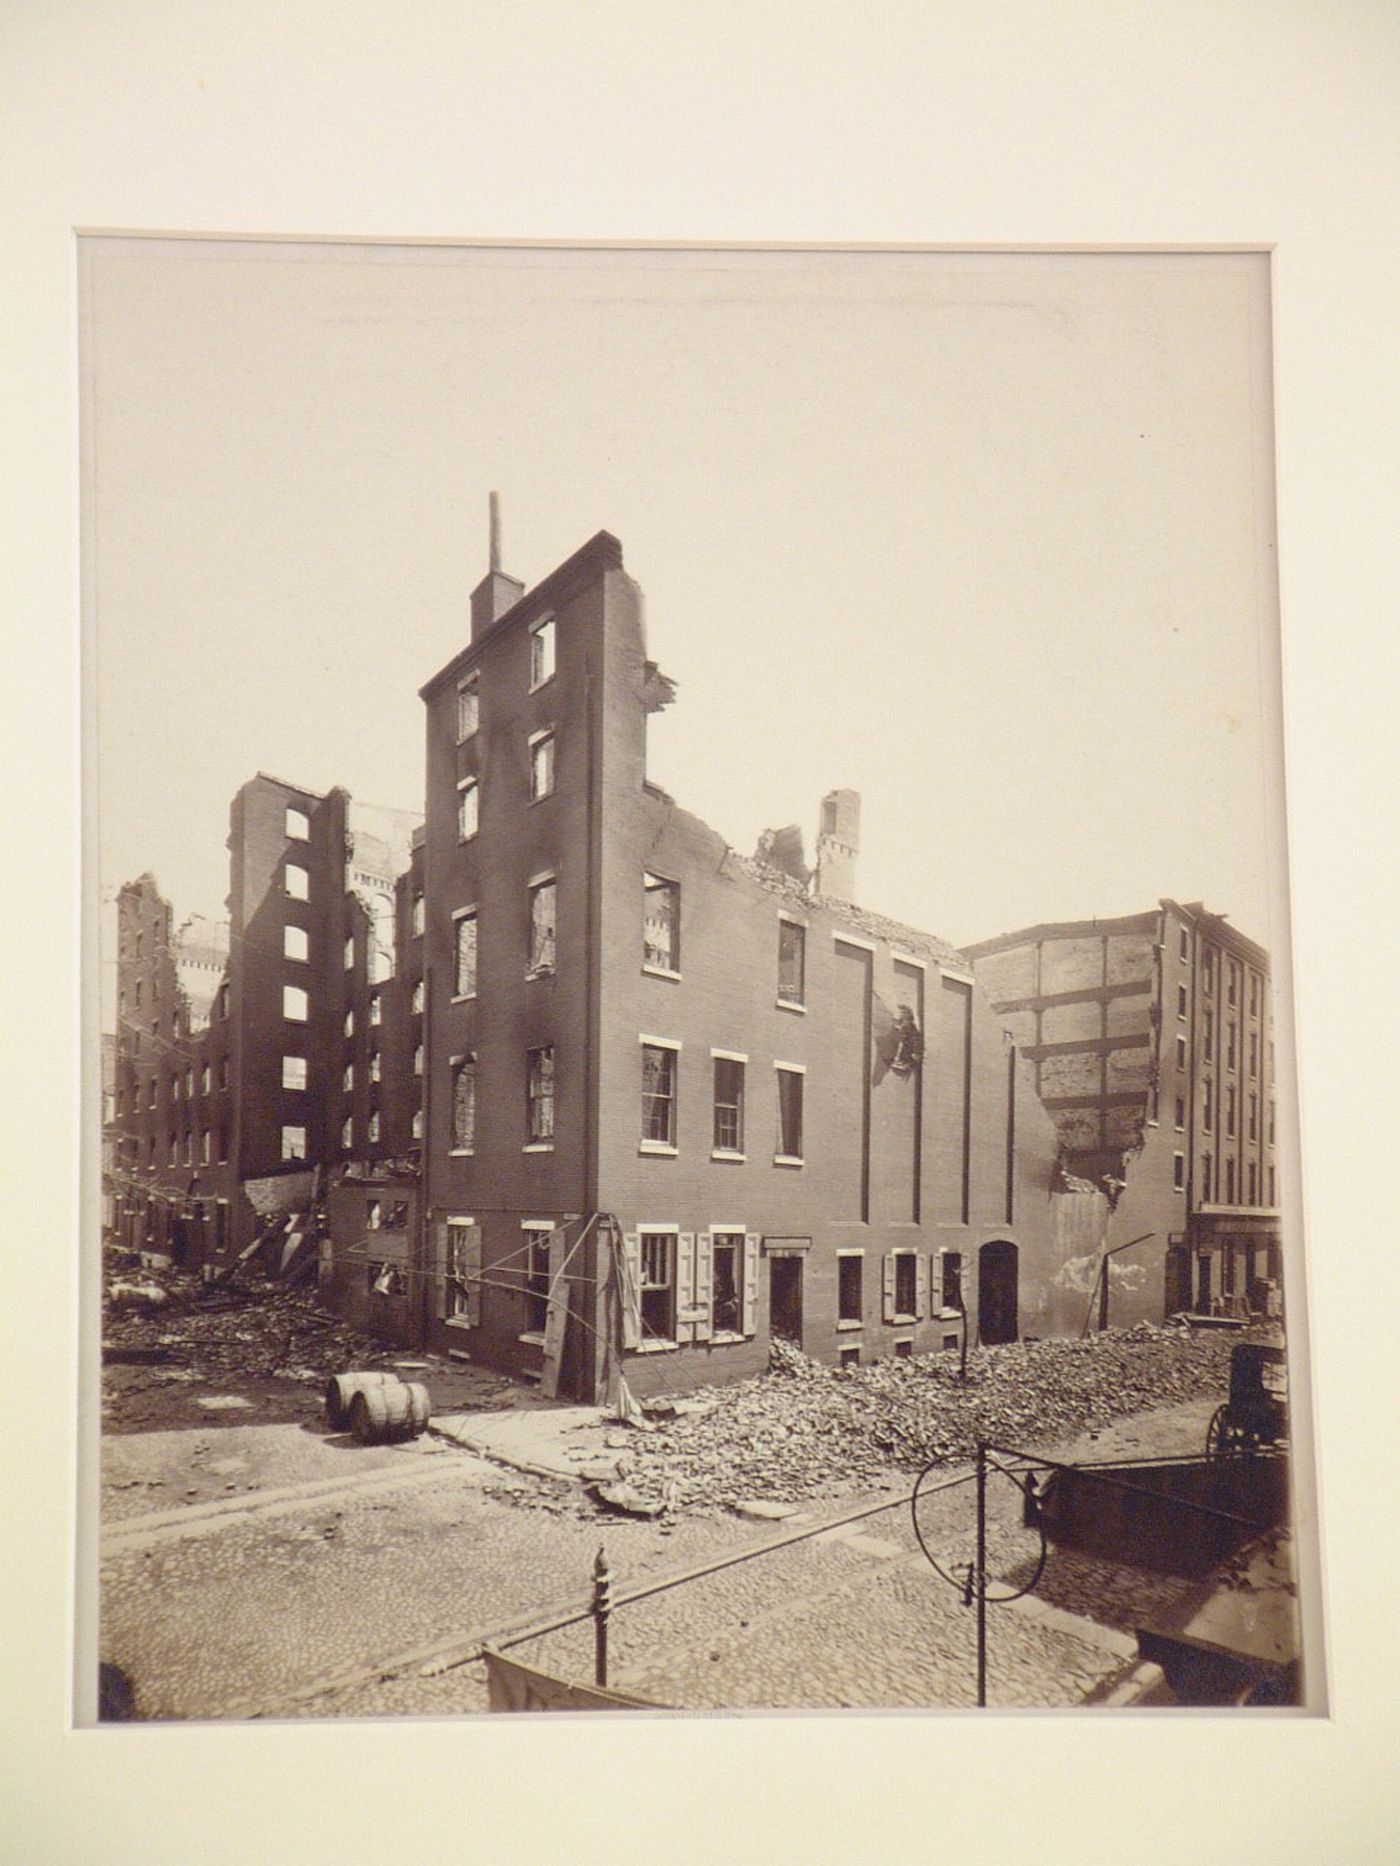 Philadelphia after the fire: View of buildings on a street corner partially destroyed